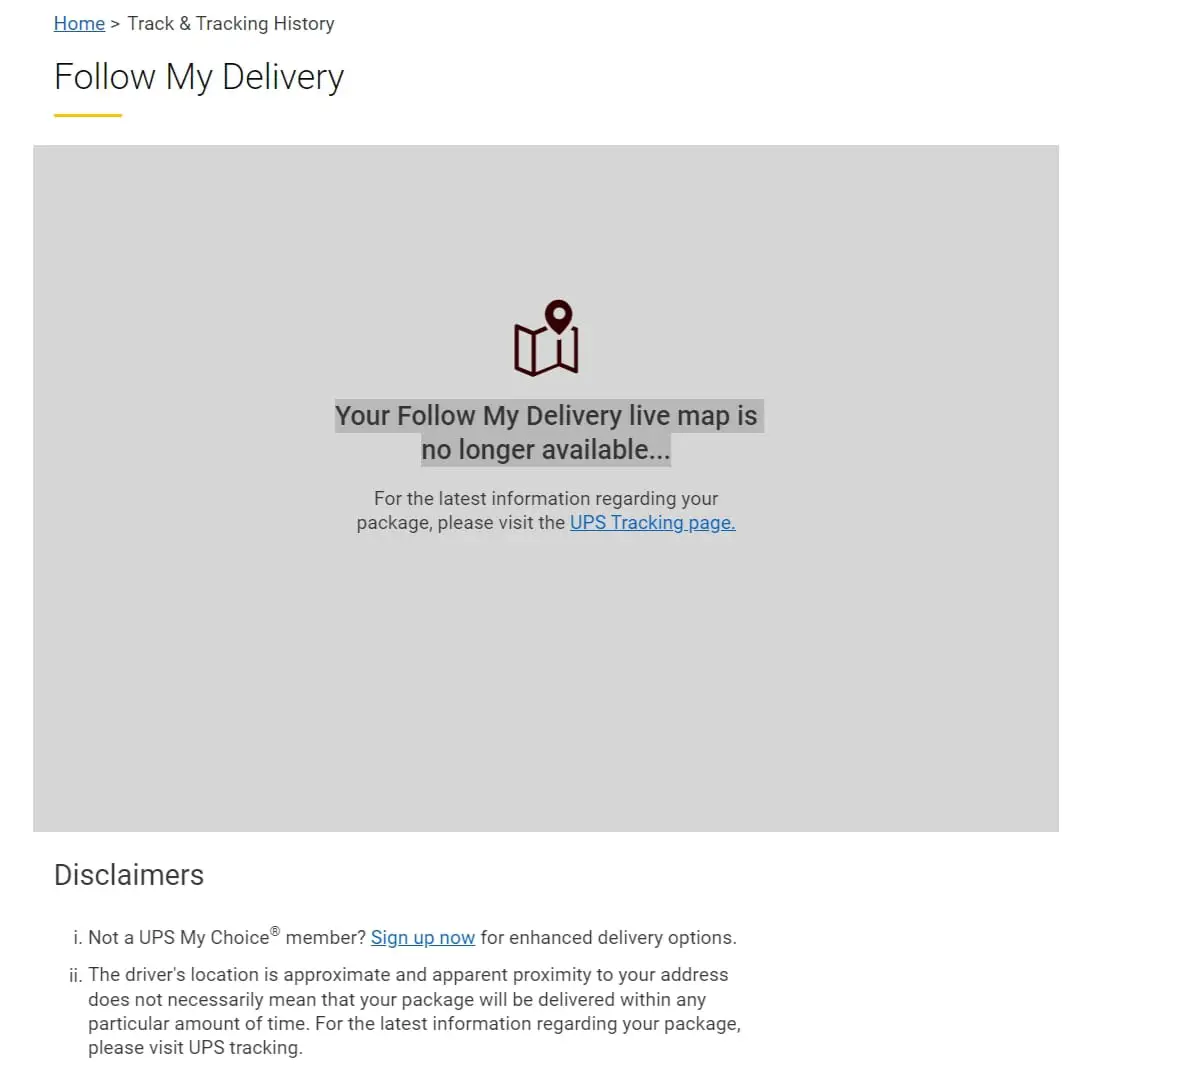 Why Follow My Delivery live map is no longer available